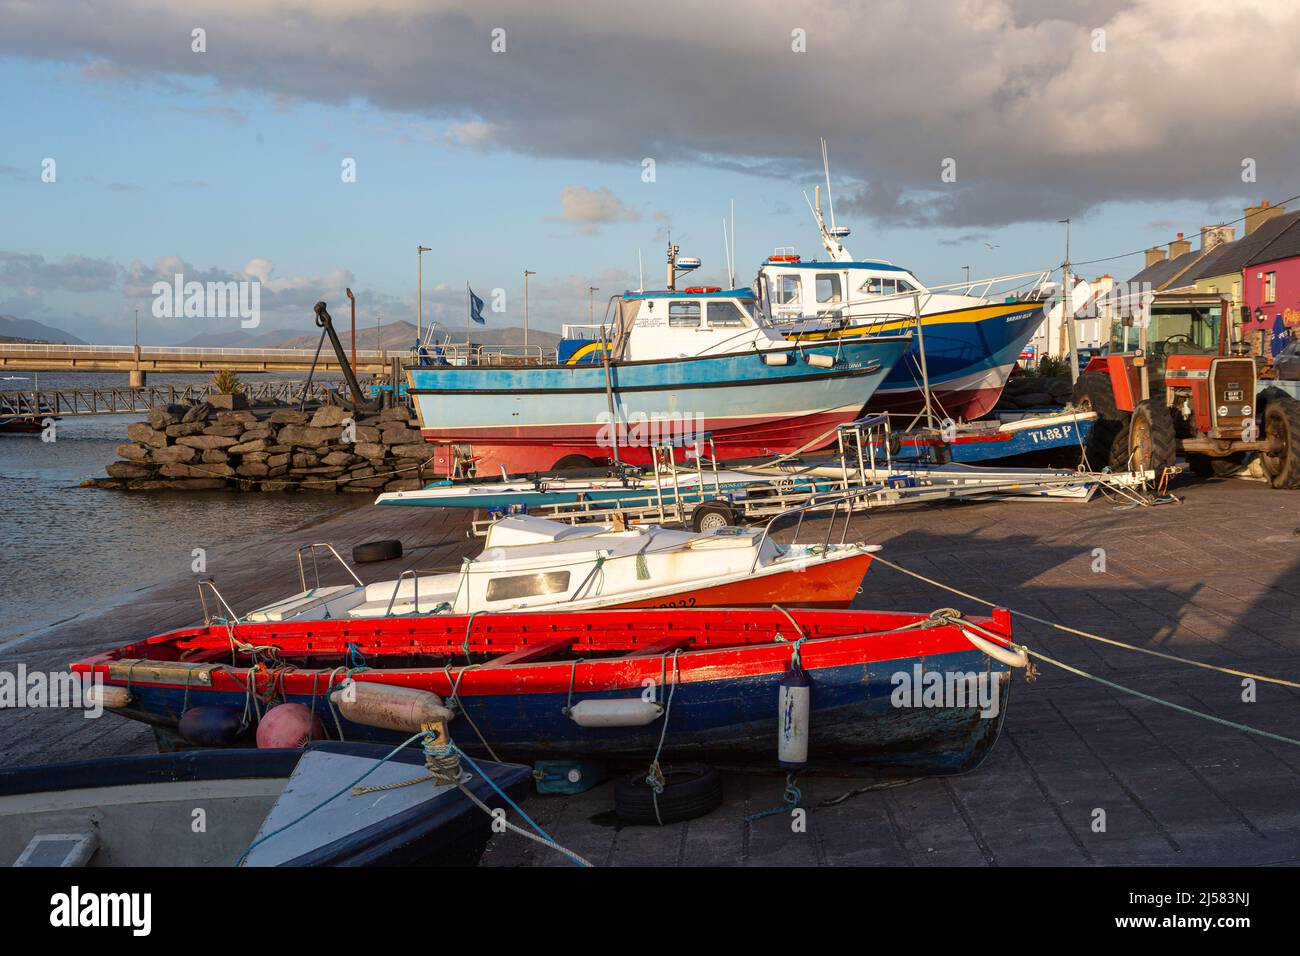 Portmagee, small fishing village in County Kerry, Ireland Stock Photo